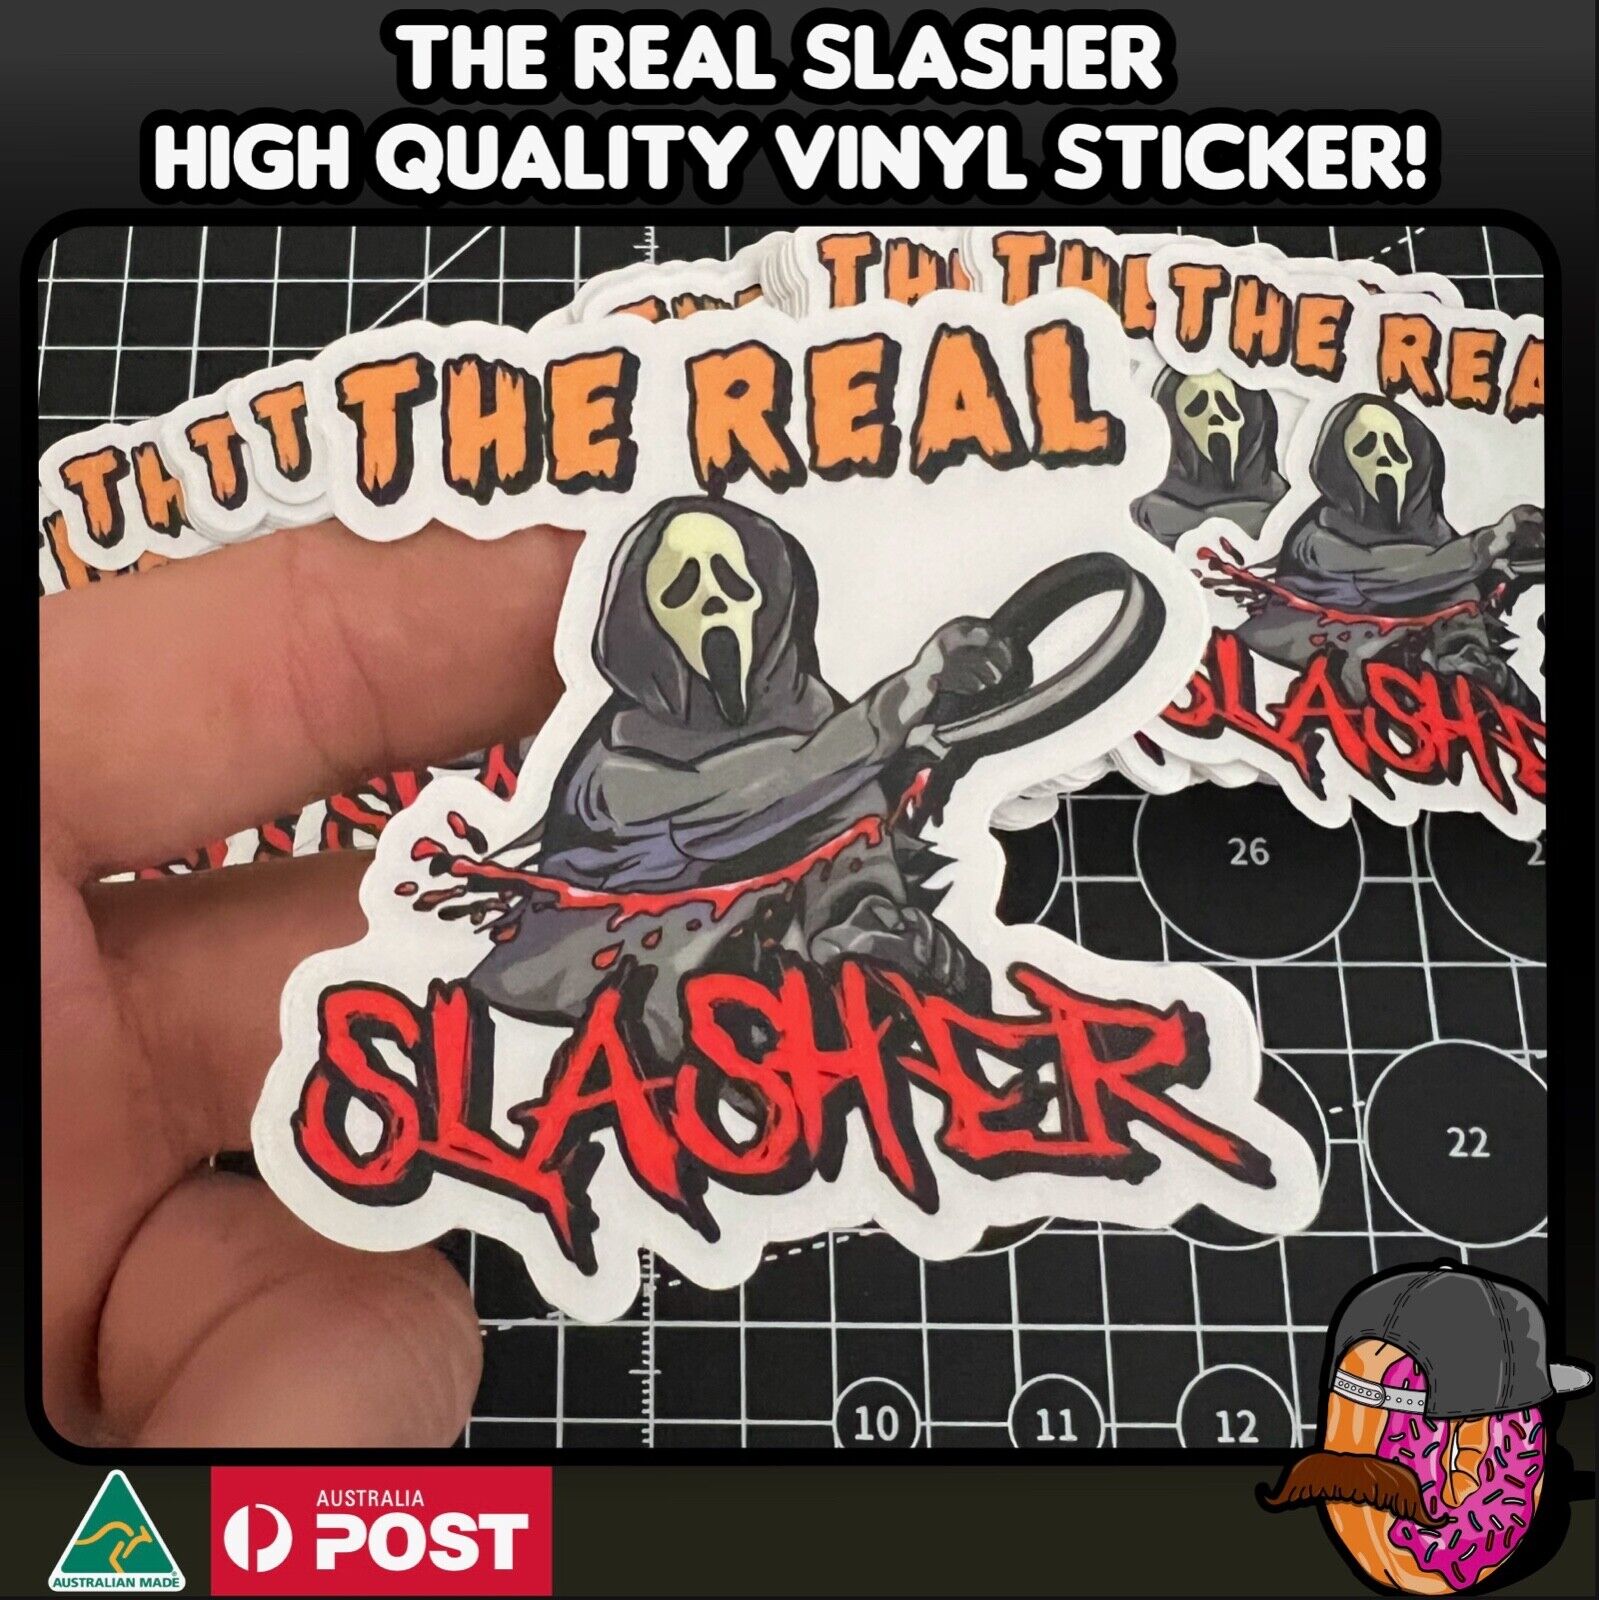 The real slasher cable tie electrician Vinyl Sticker